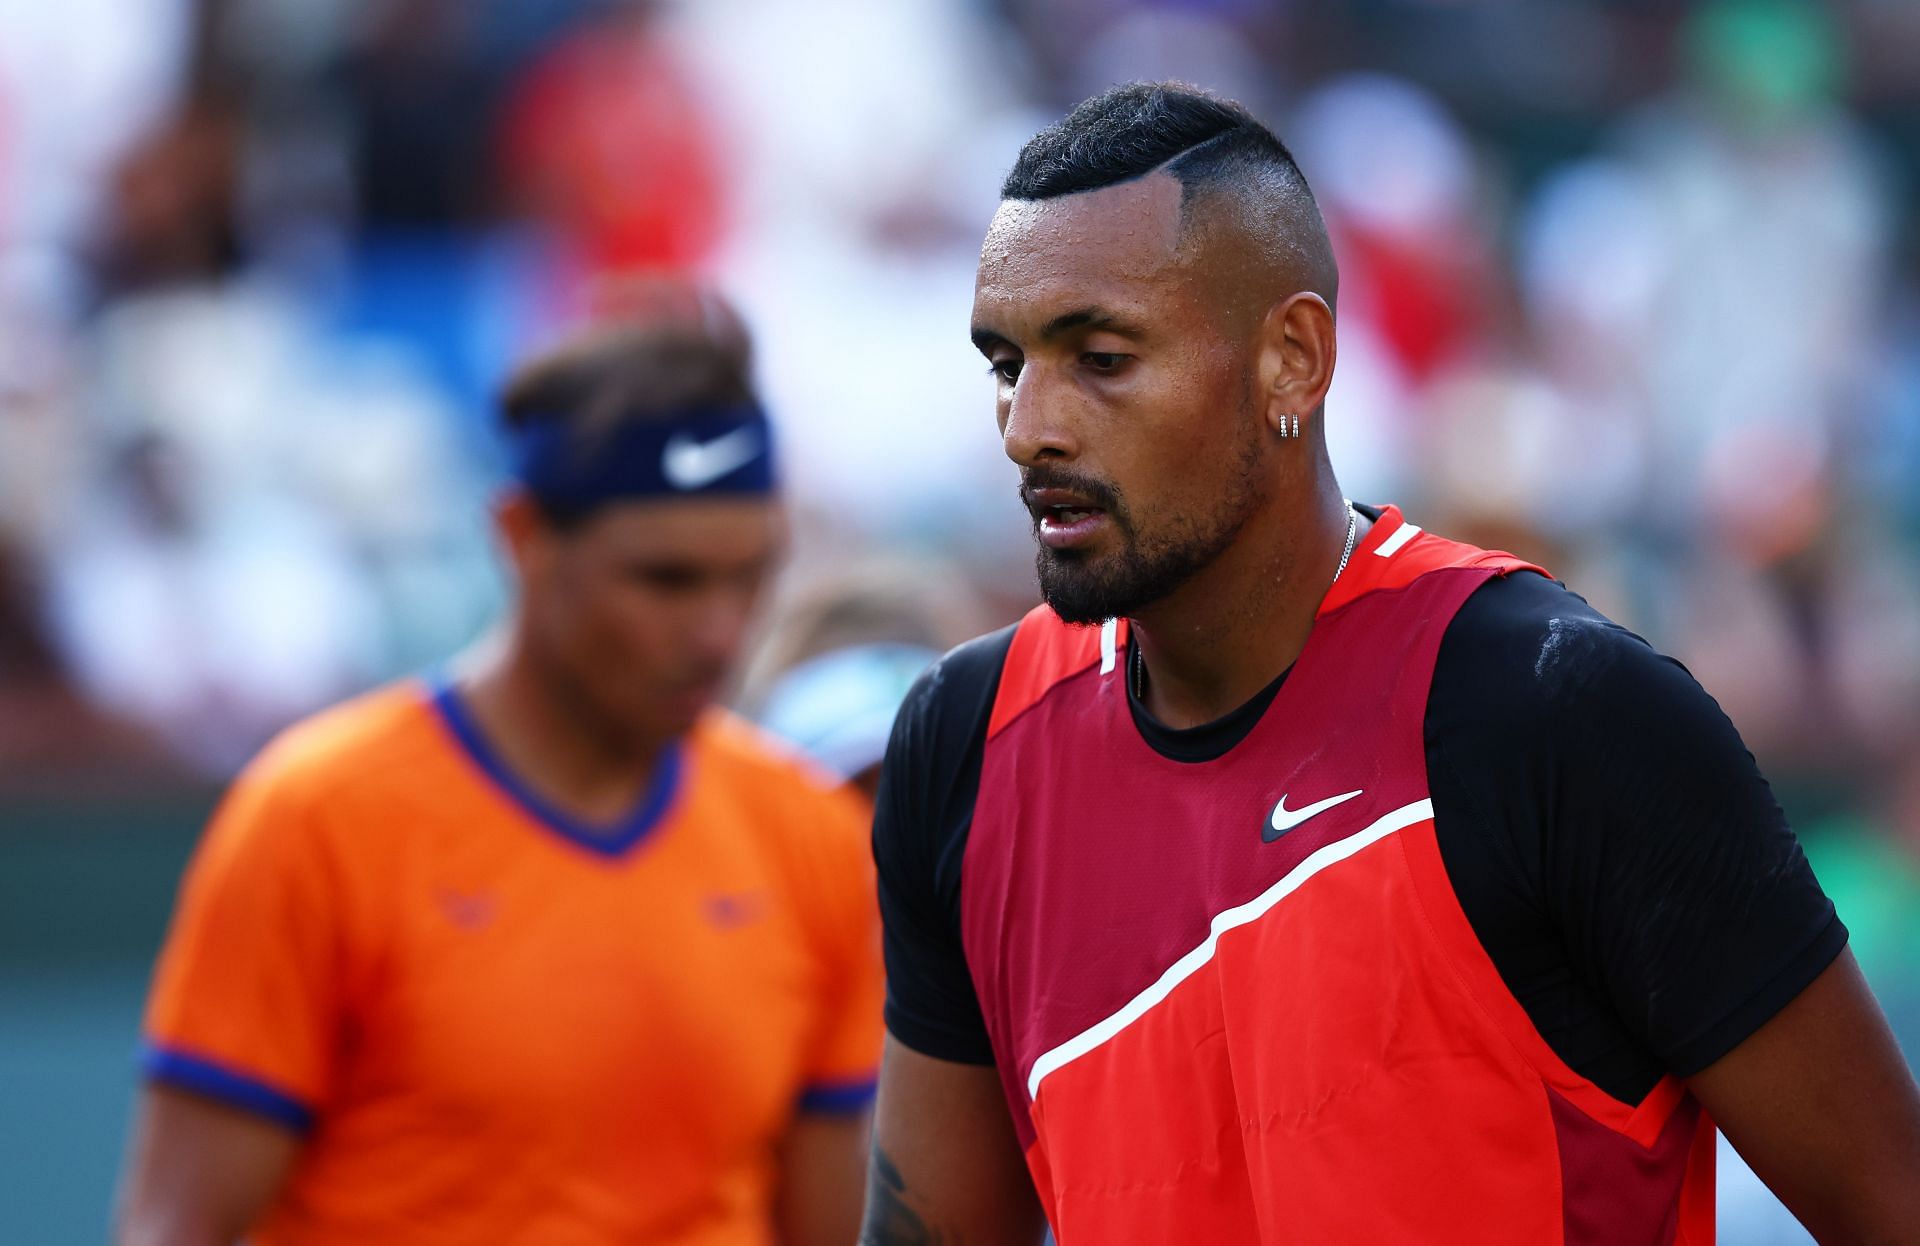 Nick Kyrgios in action during the BNP Paribas Open.